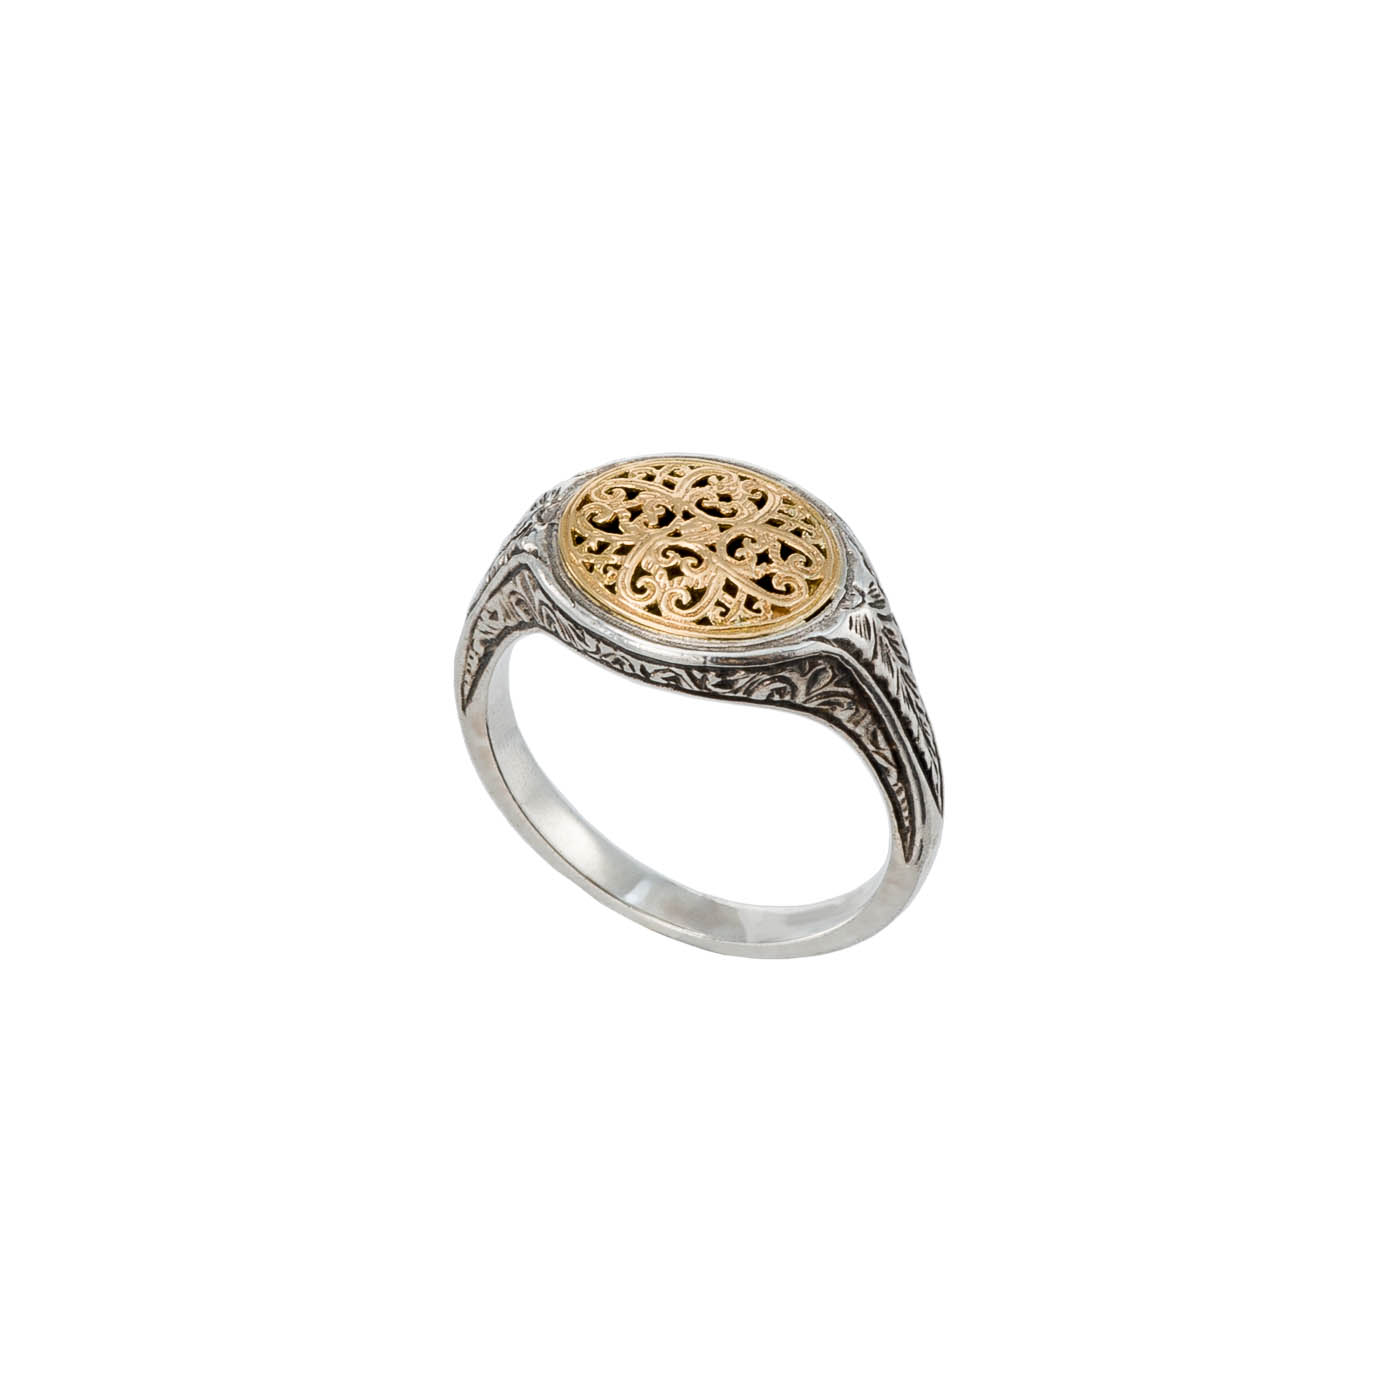 Mediterranean oval pinky ring in 18K Gold and sterling silver